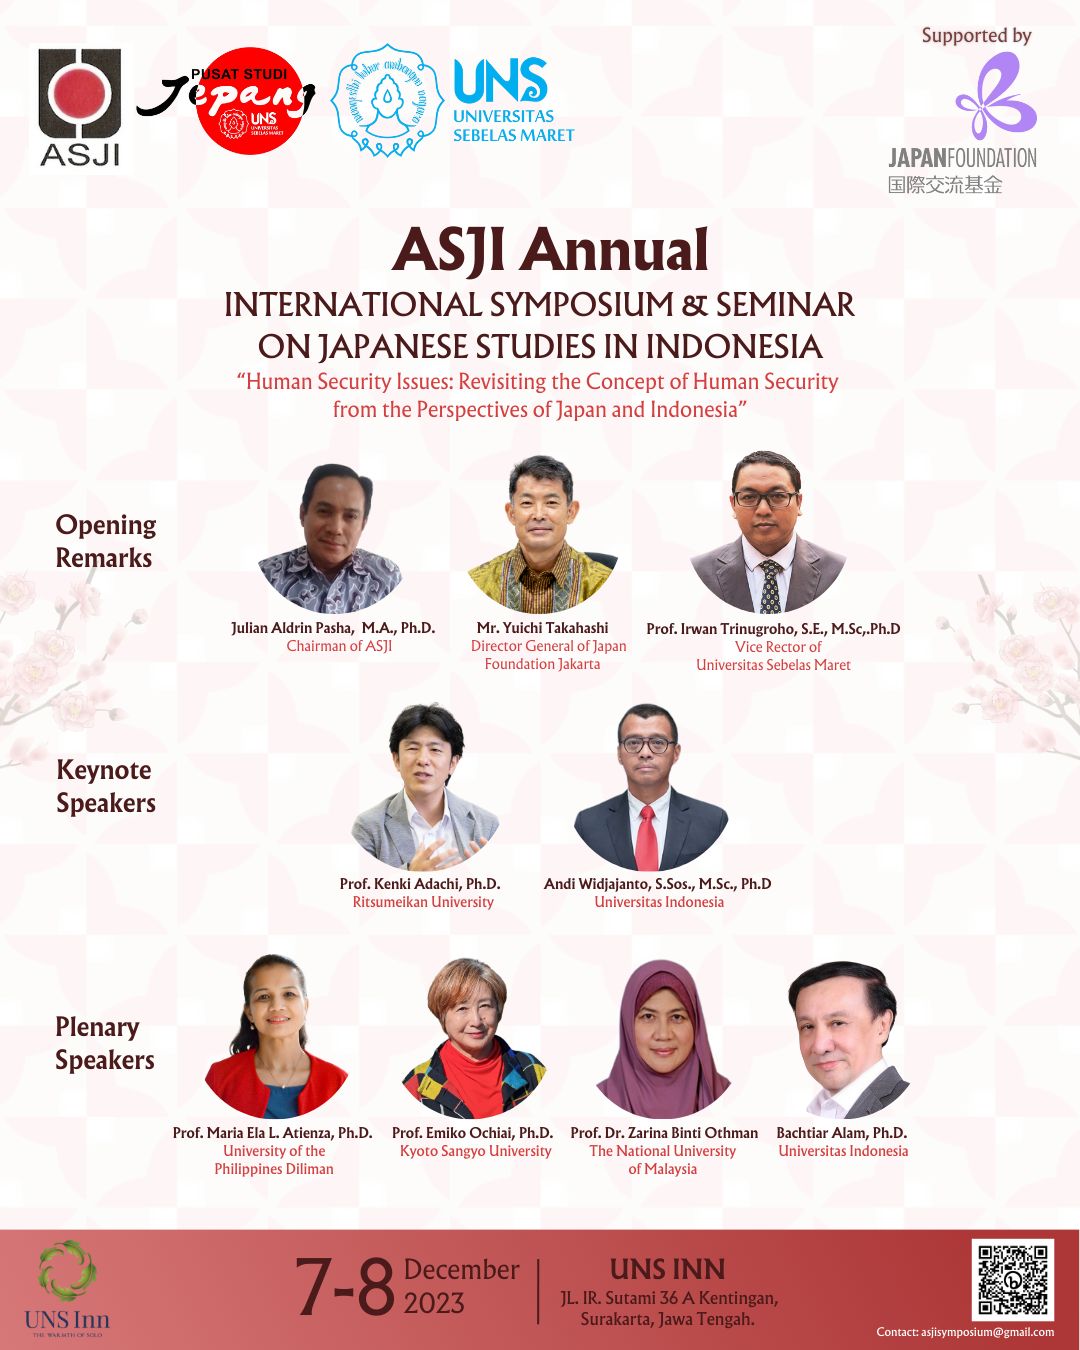 PSJ UNS and ASJI Collaboration Set to Host International Symposium & Seminar on Japanese Studies in Indonesia